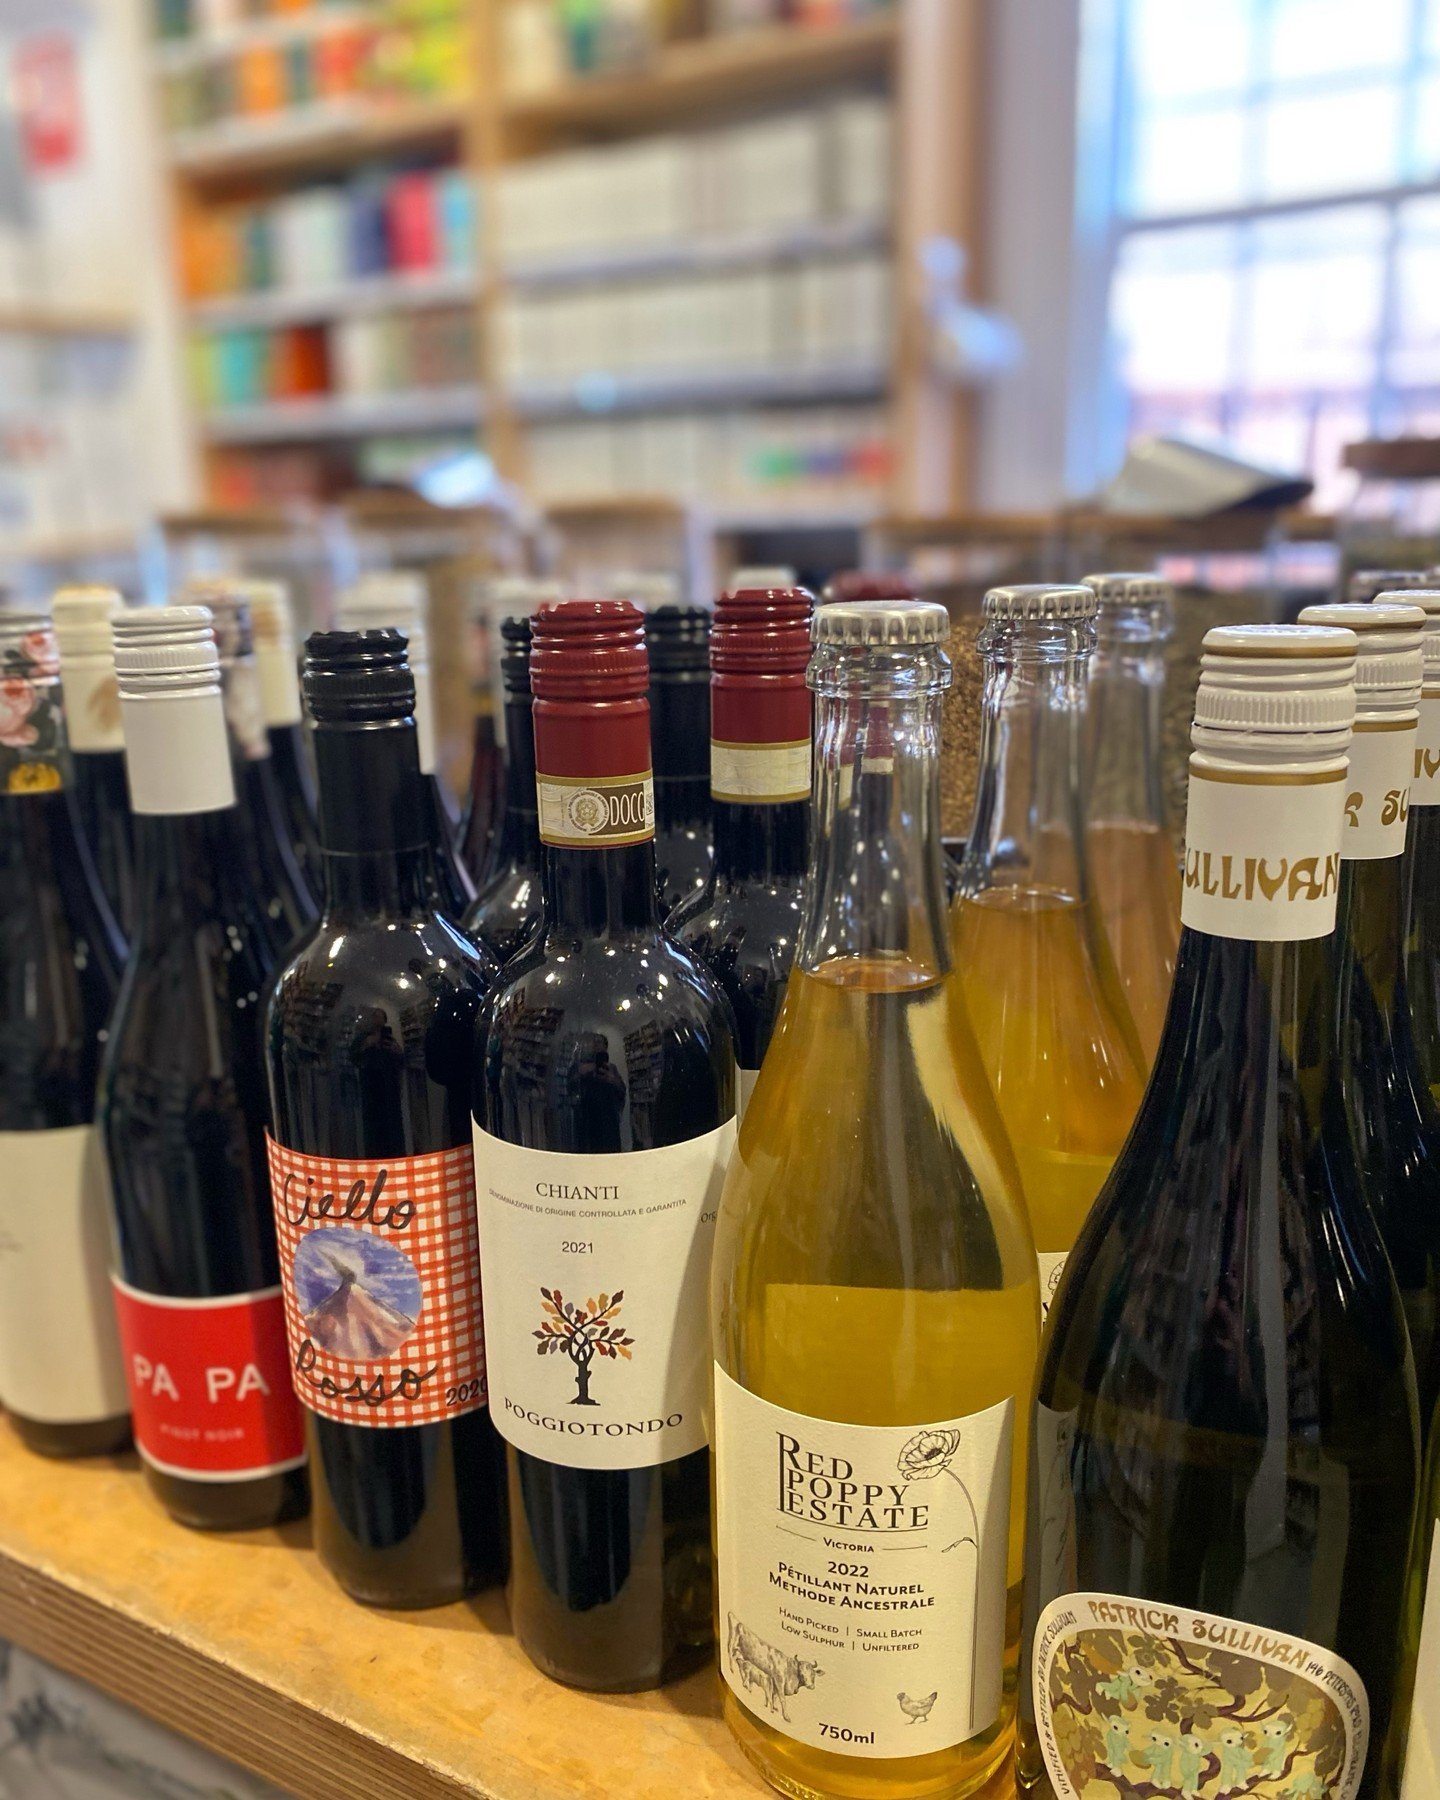 We have some great new wines in store 🍷 ready for your weekend 

Red Poppy Estate pet nat: Organic &amp; Bio Dynamic from the Macedon Ranges.

Poggiotondo Chianti: Organic Chianti from the heart of Tuscany.

Ciello Rossa: 100% organically grown grap